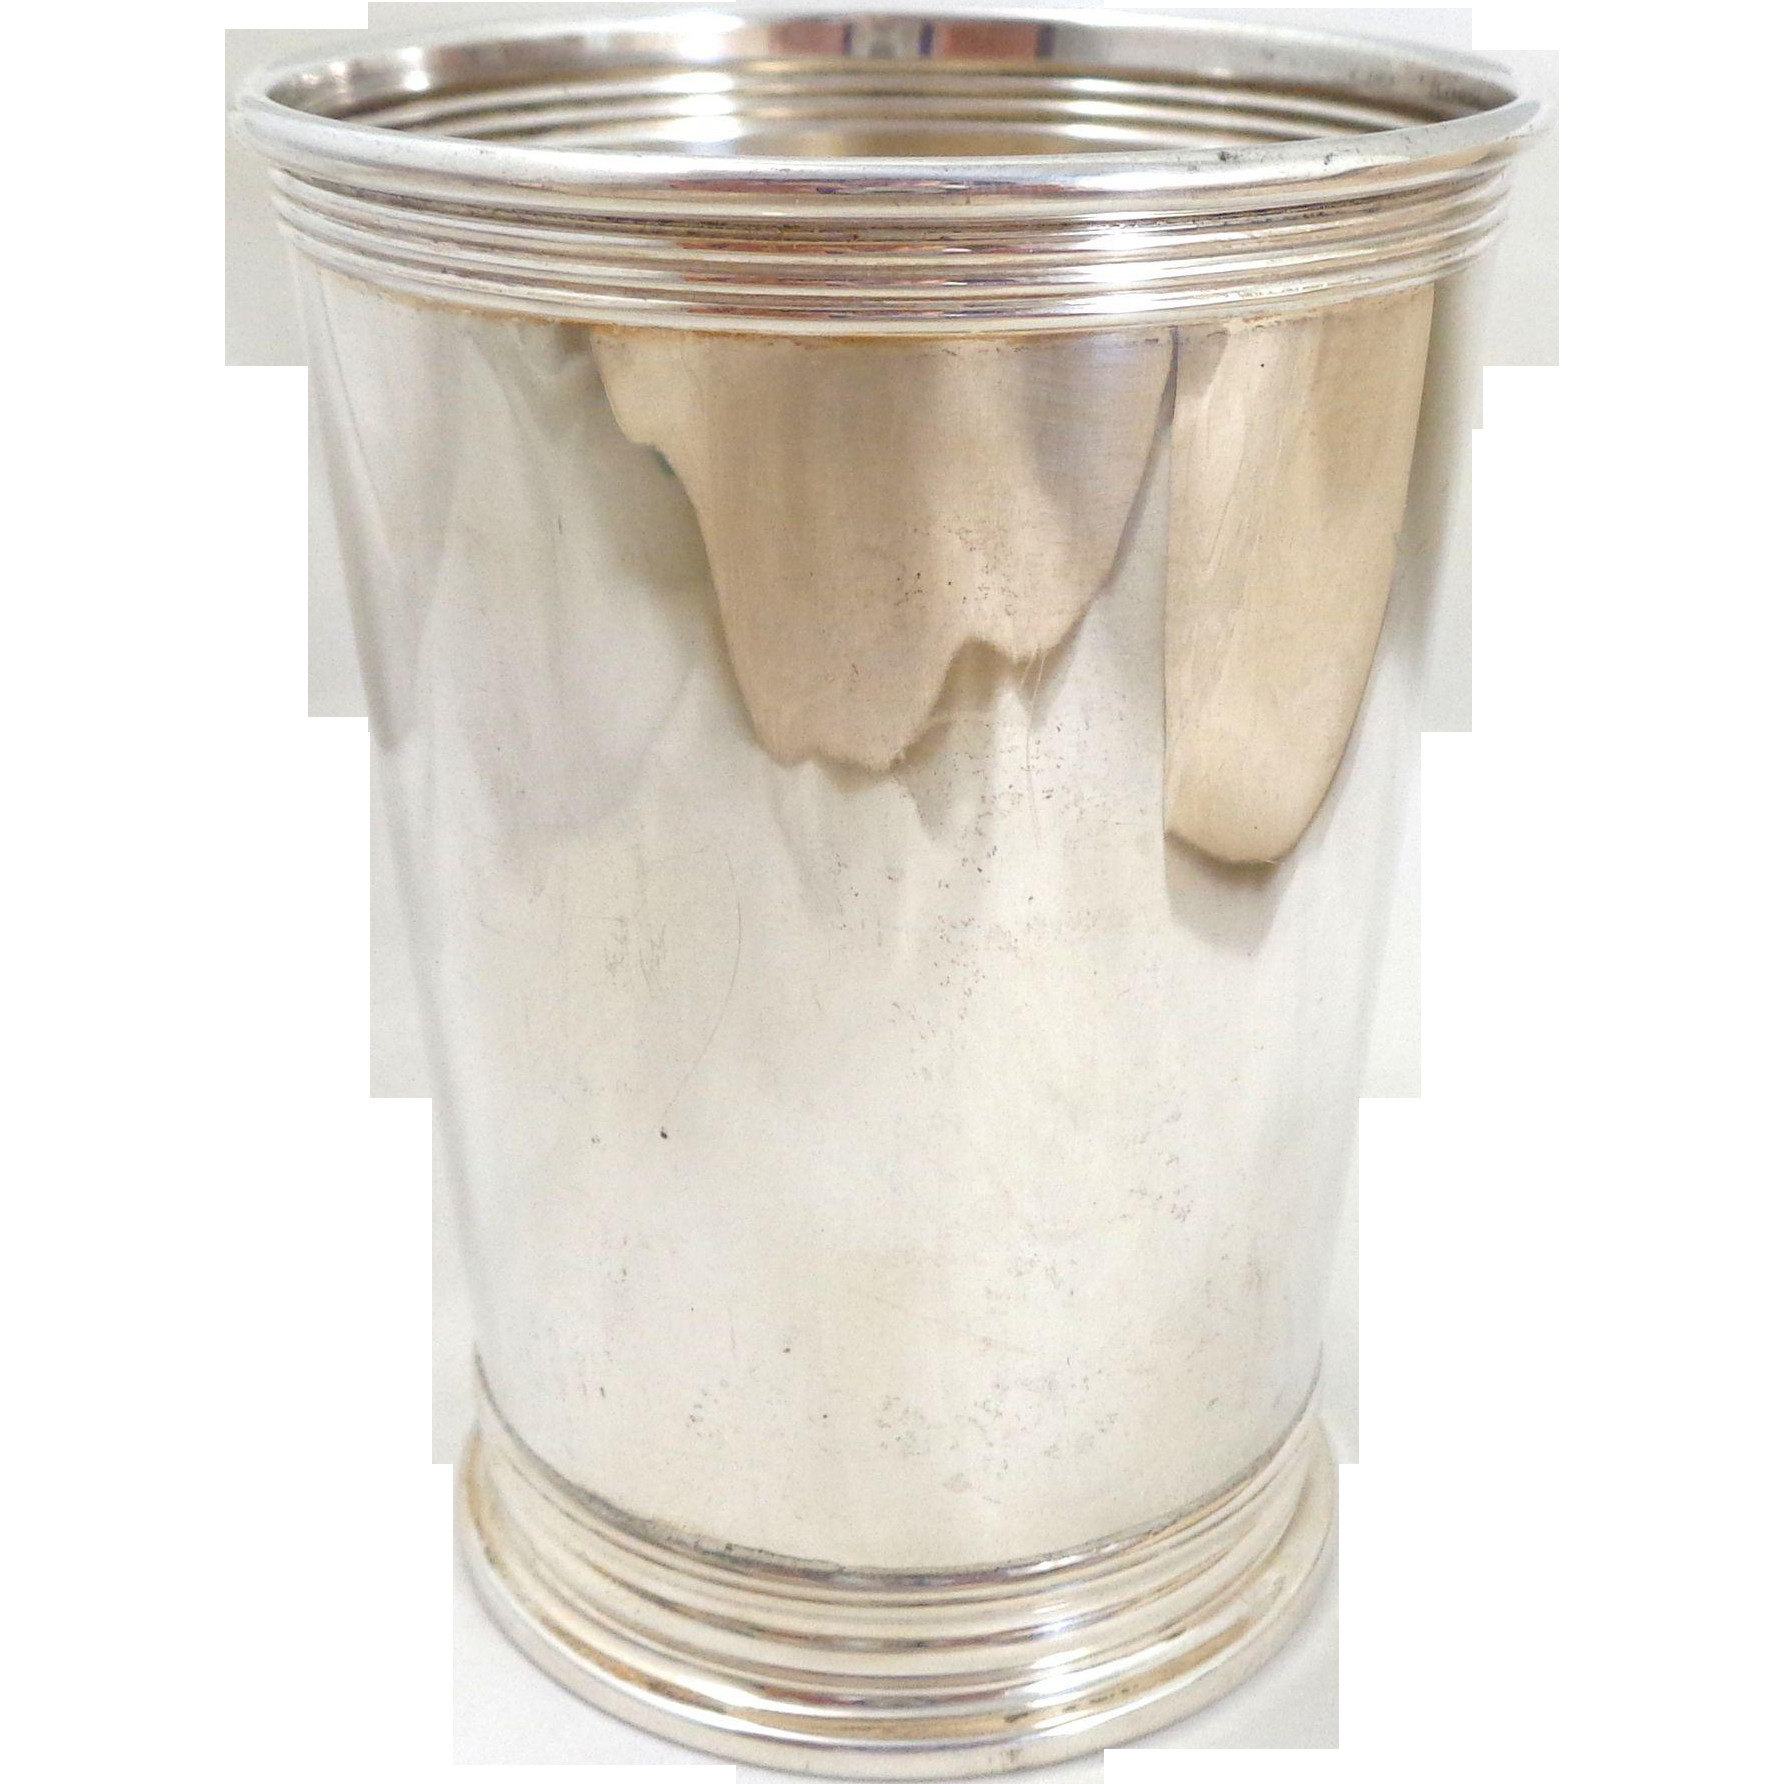 16 Popular Mint Julep Cup Vases wholesale 2022 free download mint julep cup vases wholesale of vintage newport sterling silver 1660 mint julep cup river road with vintage newport sterling silver 1660 mint julep cup river road collectibles ruby lane